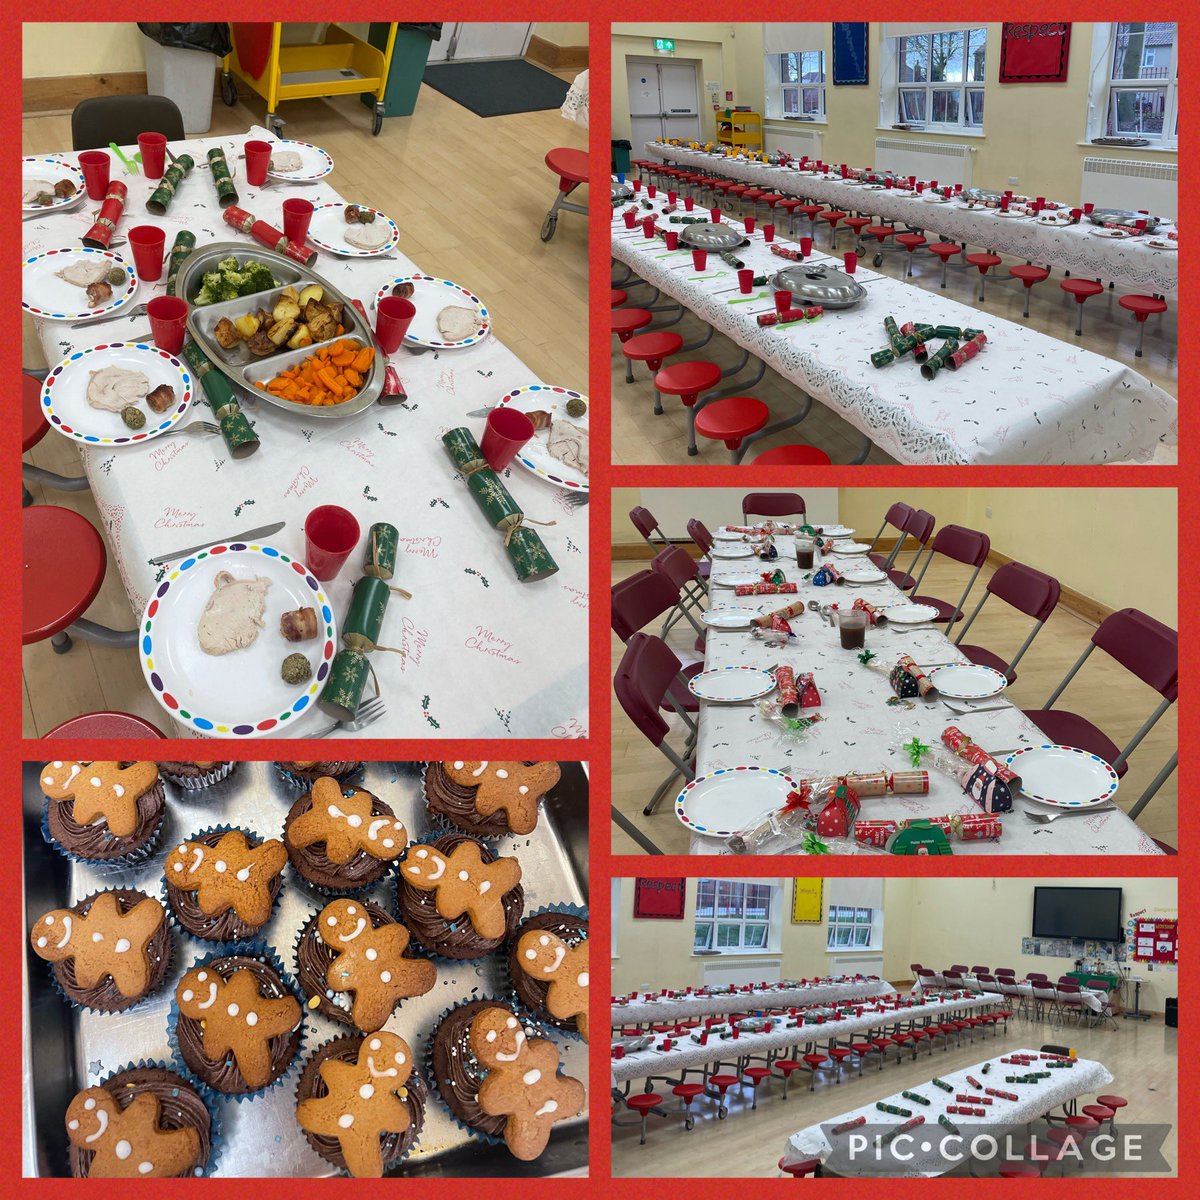 🎄✨Enjoying the festive vibes at school Christmas dinner! Delicious food, cheerful tunes, talented chef and great company. Wishing everyone a joyful holiday season! 🍽️🎁 #SchoolChristmas @Little_Gonerby @InfinityAcad @MrHawkinsHT